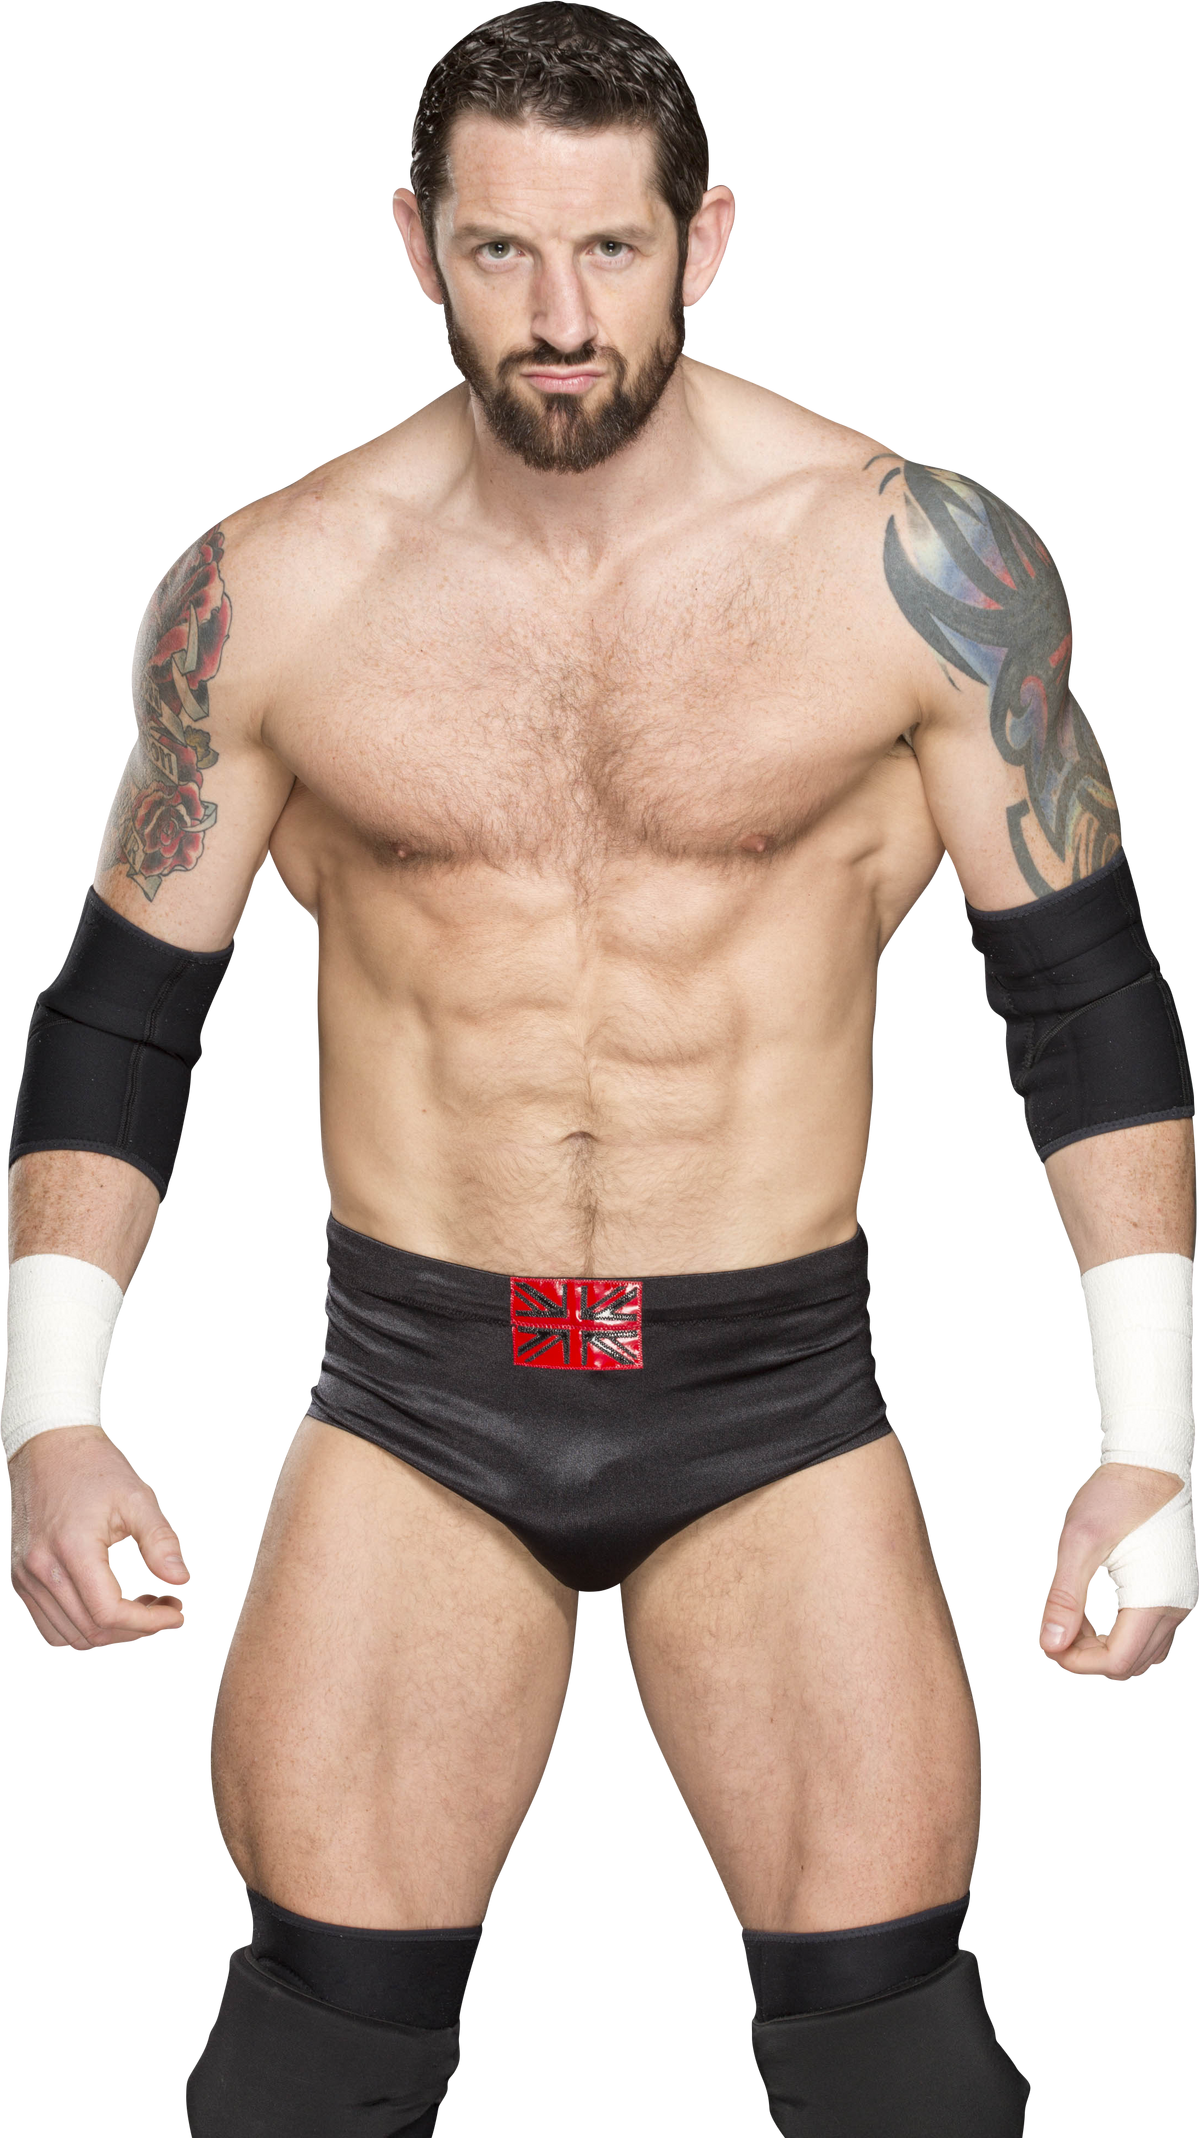 The sexiness is just oozing from him | Wade barrett, Wrestling wwe, Good  looking men